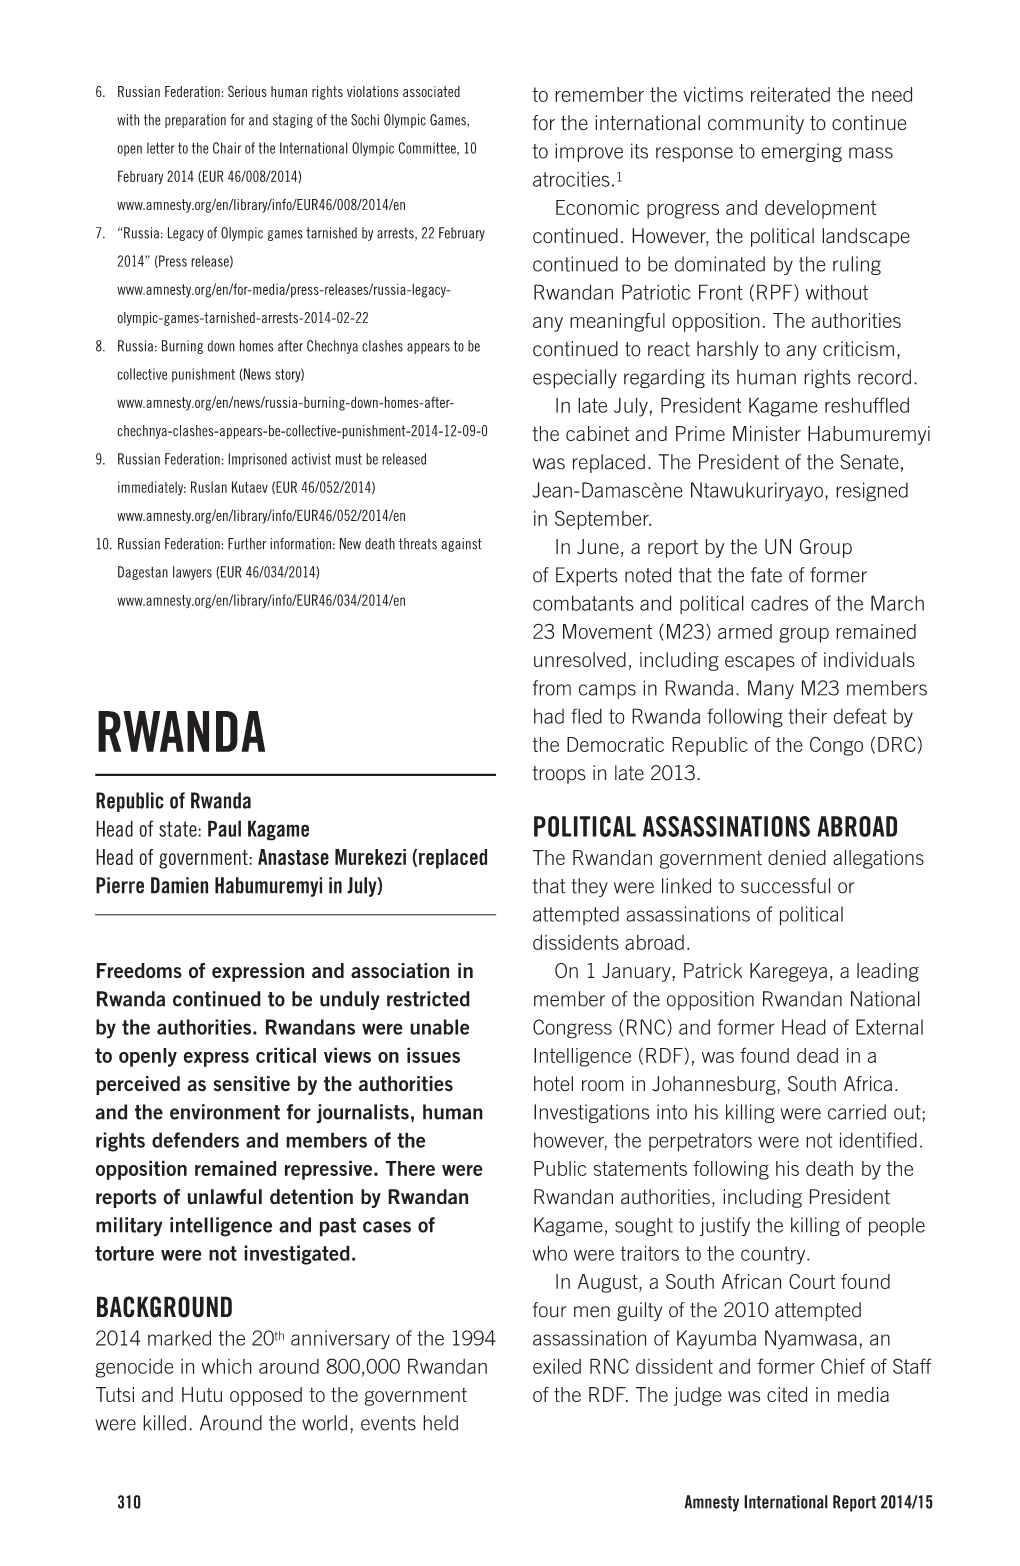 Amnesty International Report 2014/15 the State of the World's Human Rights